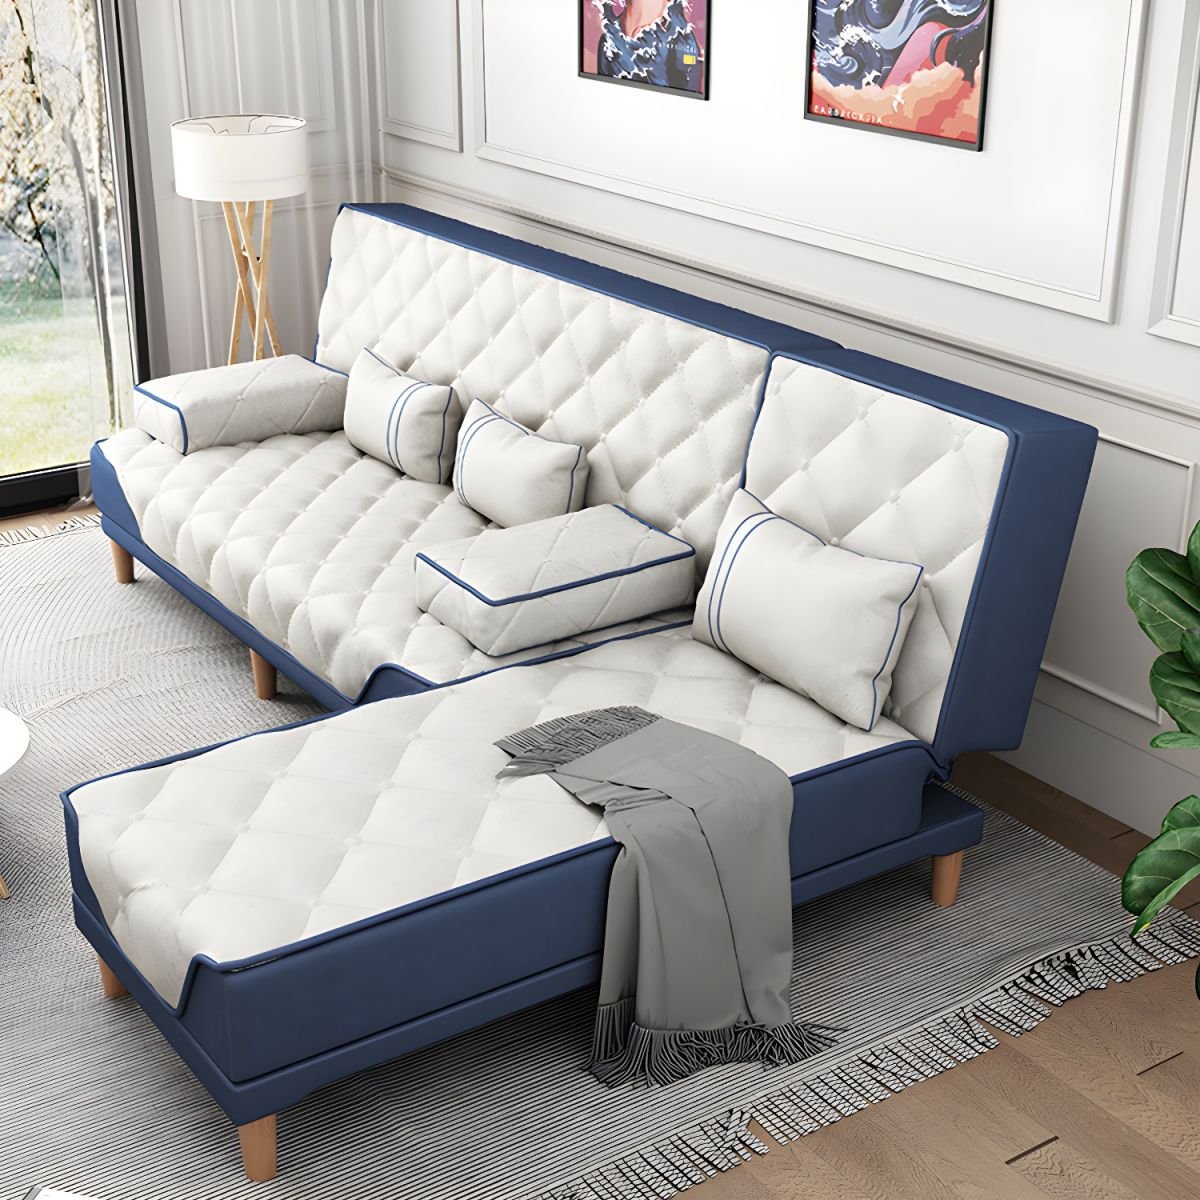 Contemporary Tight Back Convertible Sofa and Chaise with Pillow Top Arm - 96"L x 57"W x 34"H Dark Blue/ White Tech Cloth